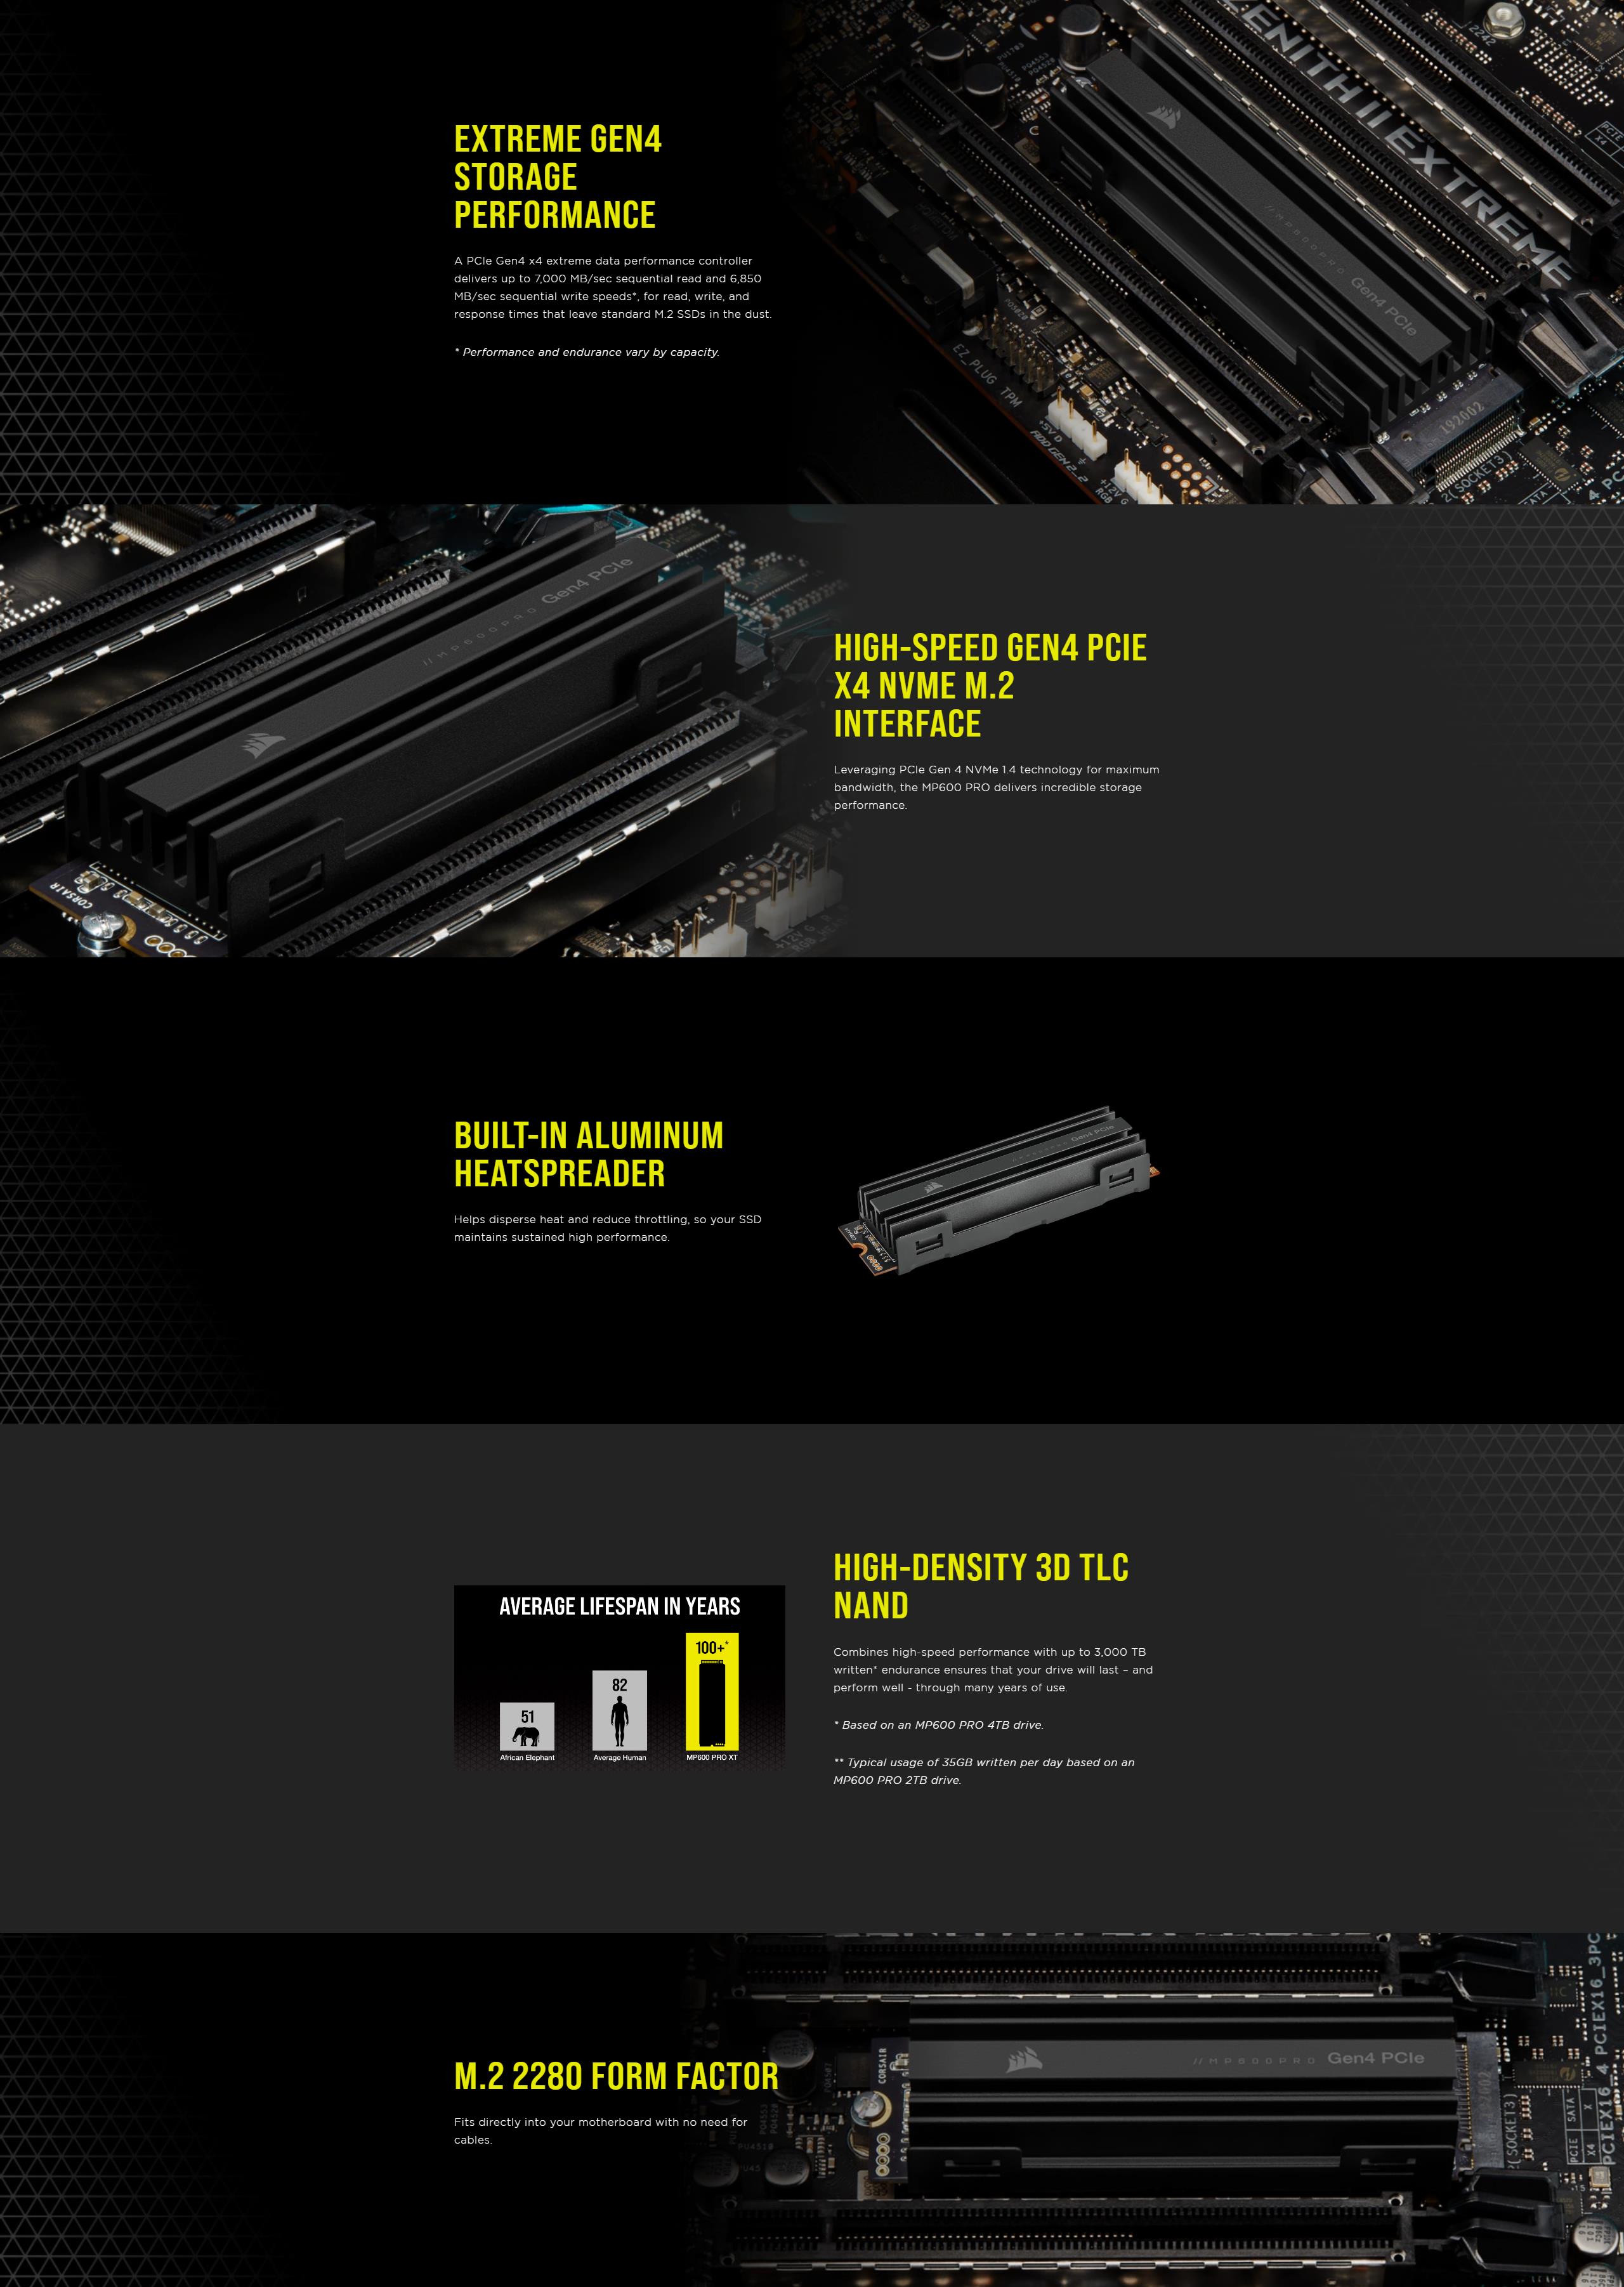 A large marketing image providing additional information about the product Corsair MP600 Pro 4TB Gen 4 PCIe NVMe M.2 SSD - Additional alt info not provided